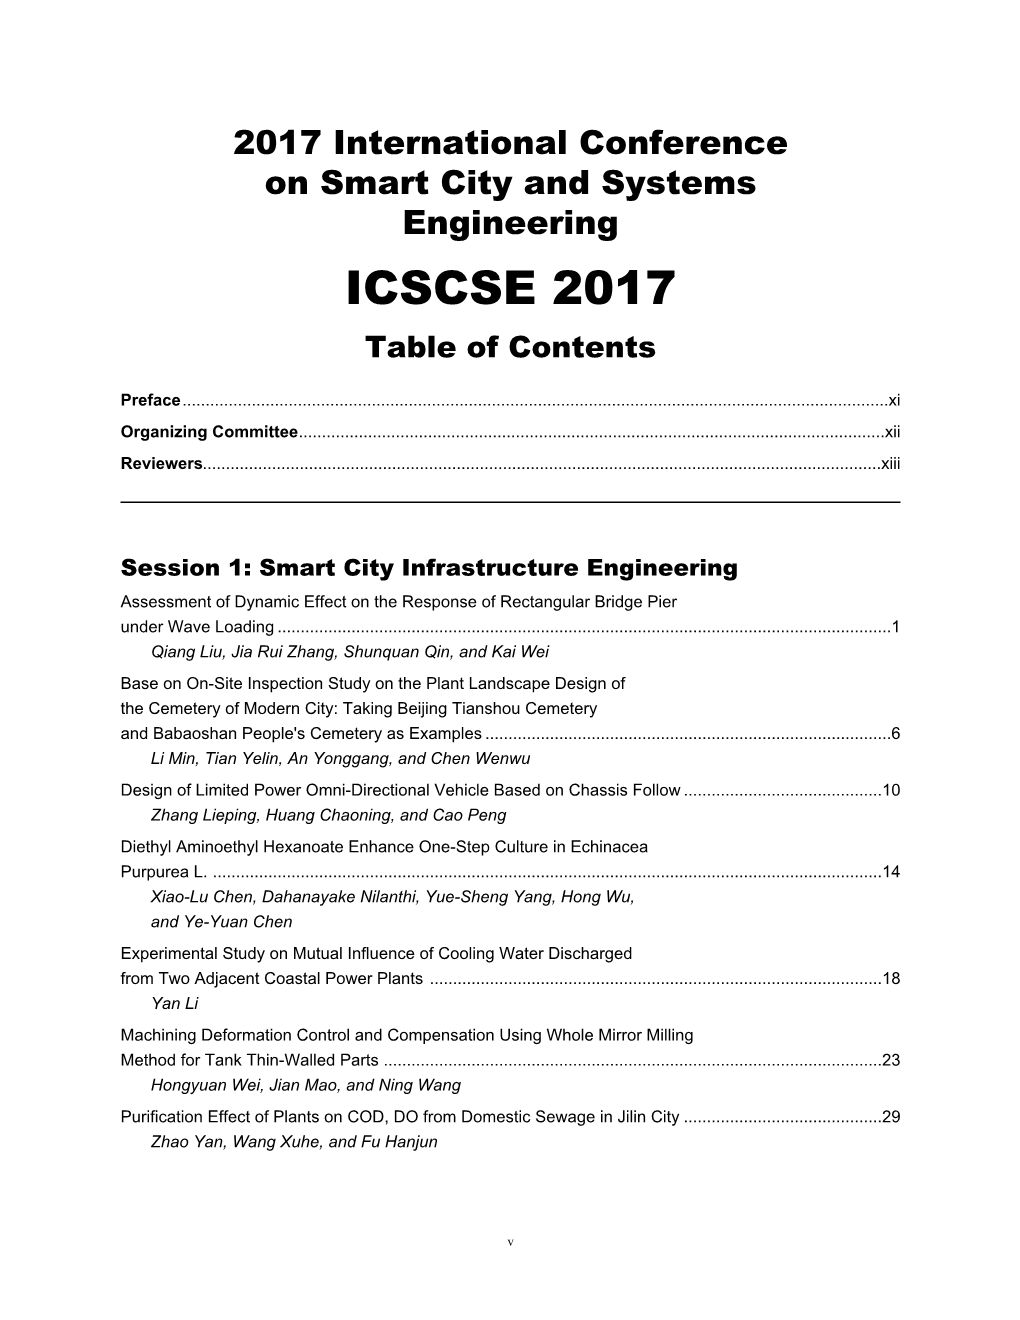 ICSCSE 2017 Table of Contents